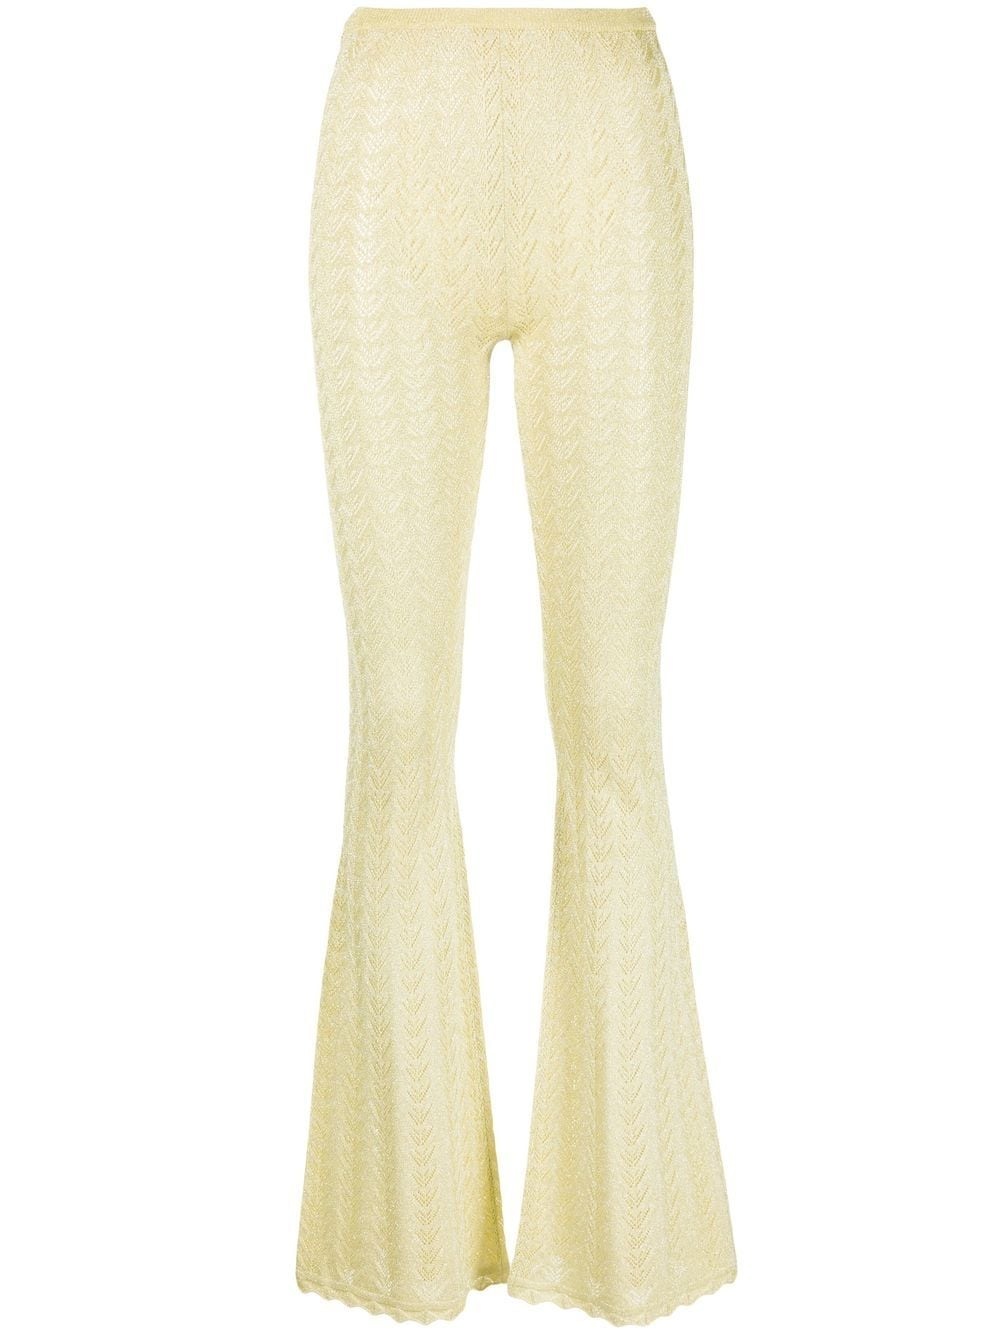 lace-knit flared trousers - 1